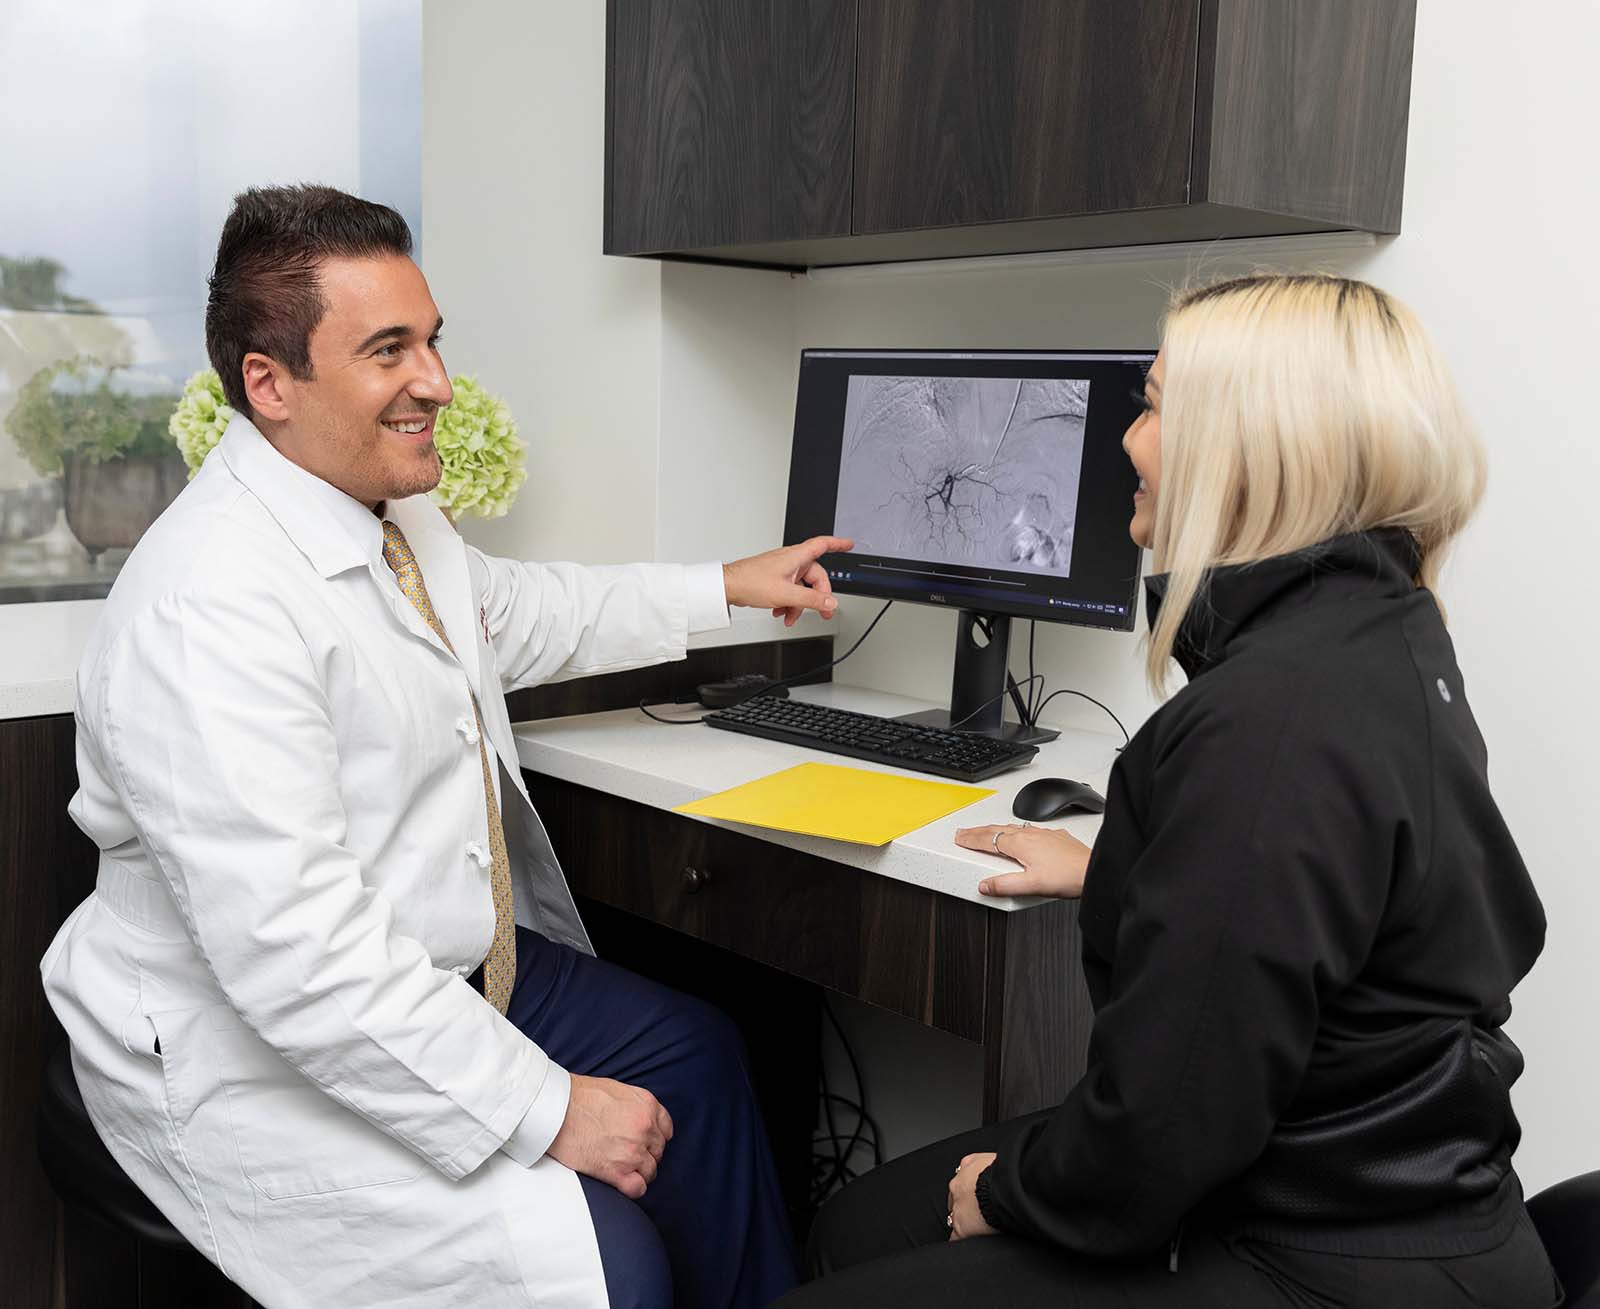 Dr. Navid Eghbalieh happily discussing the successful cancer treatment with patient at their Los Angeles office